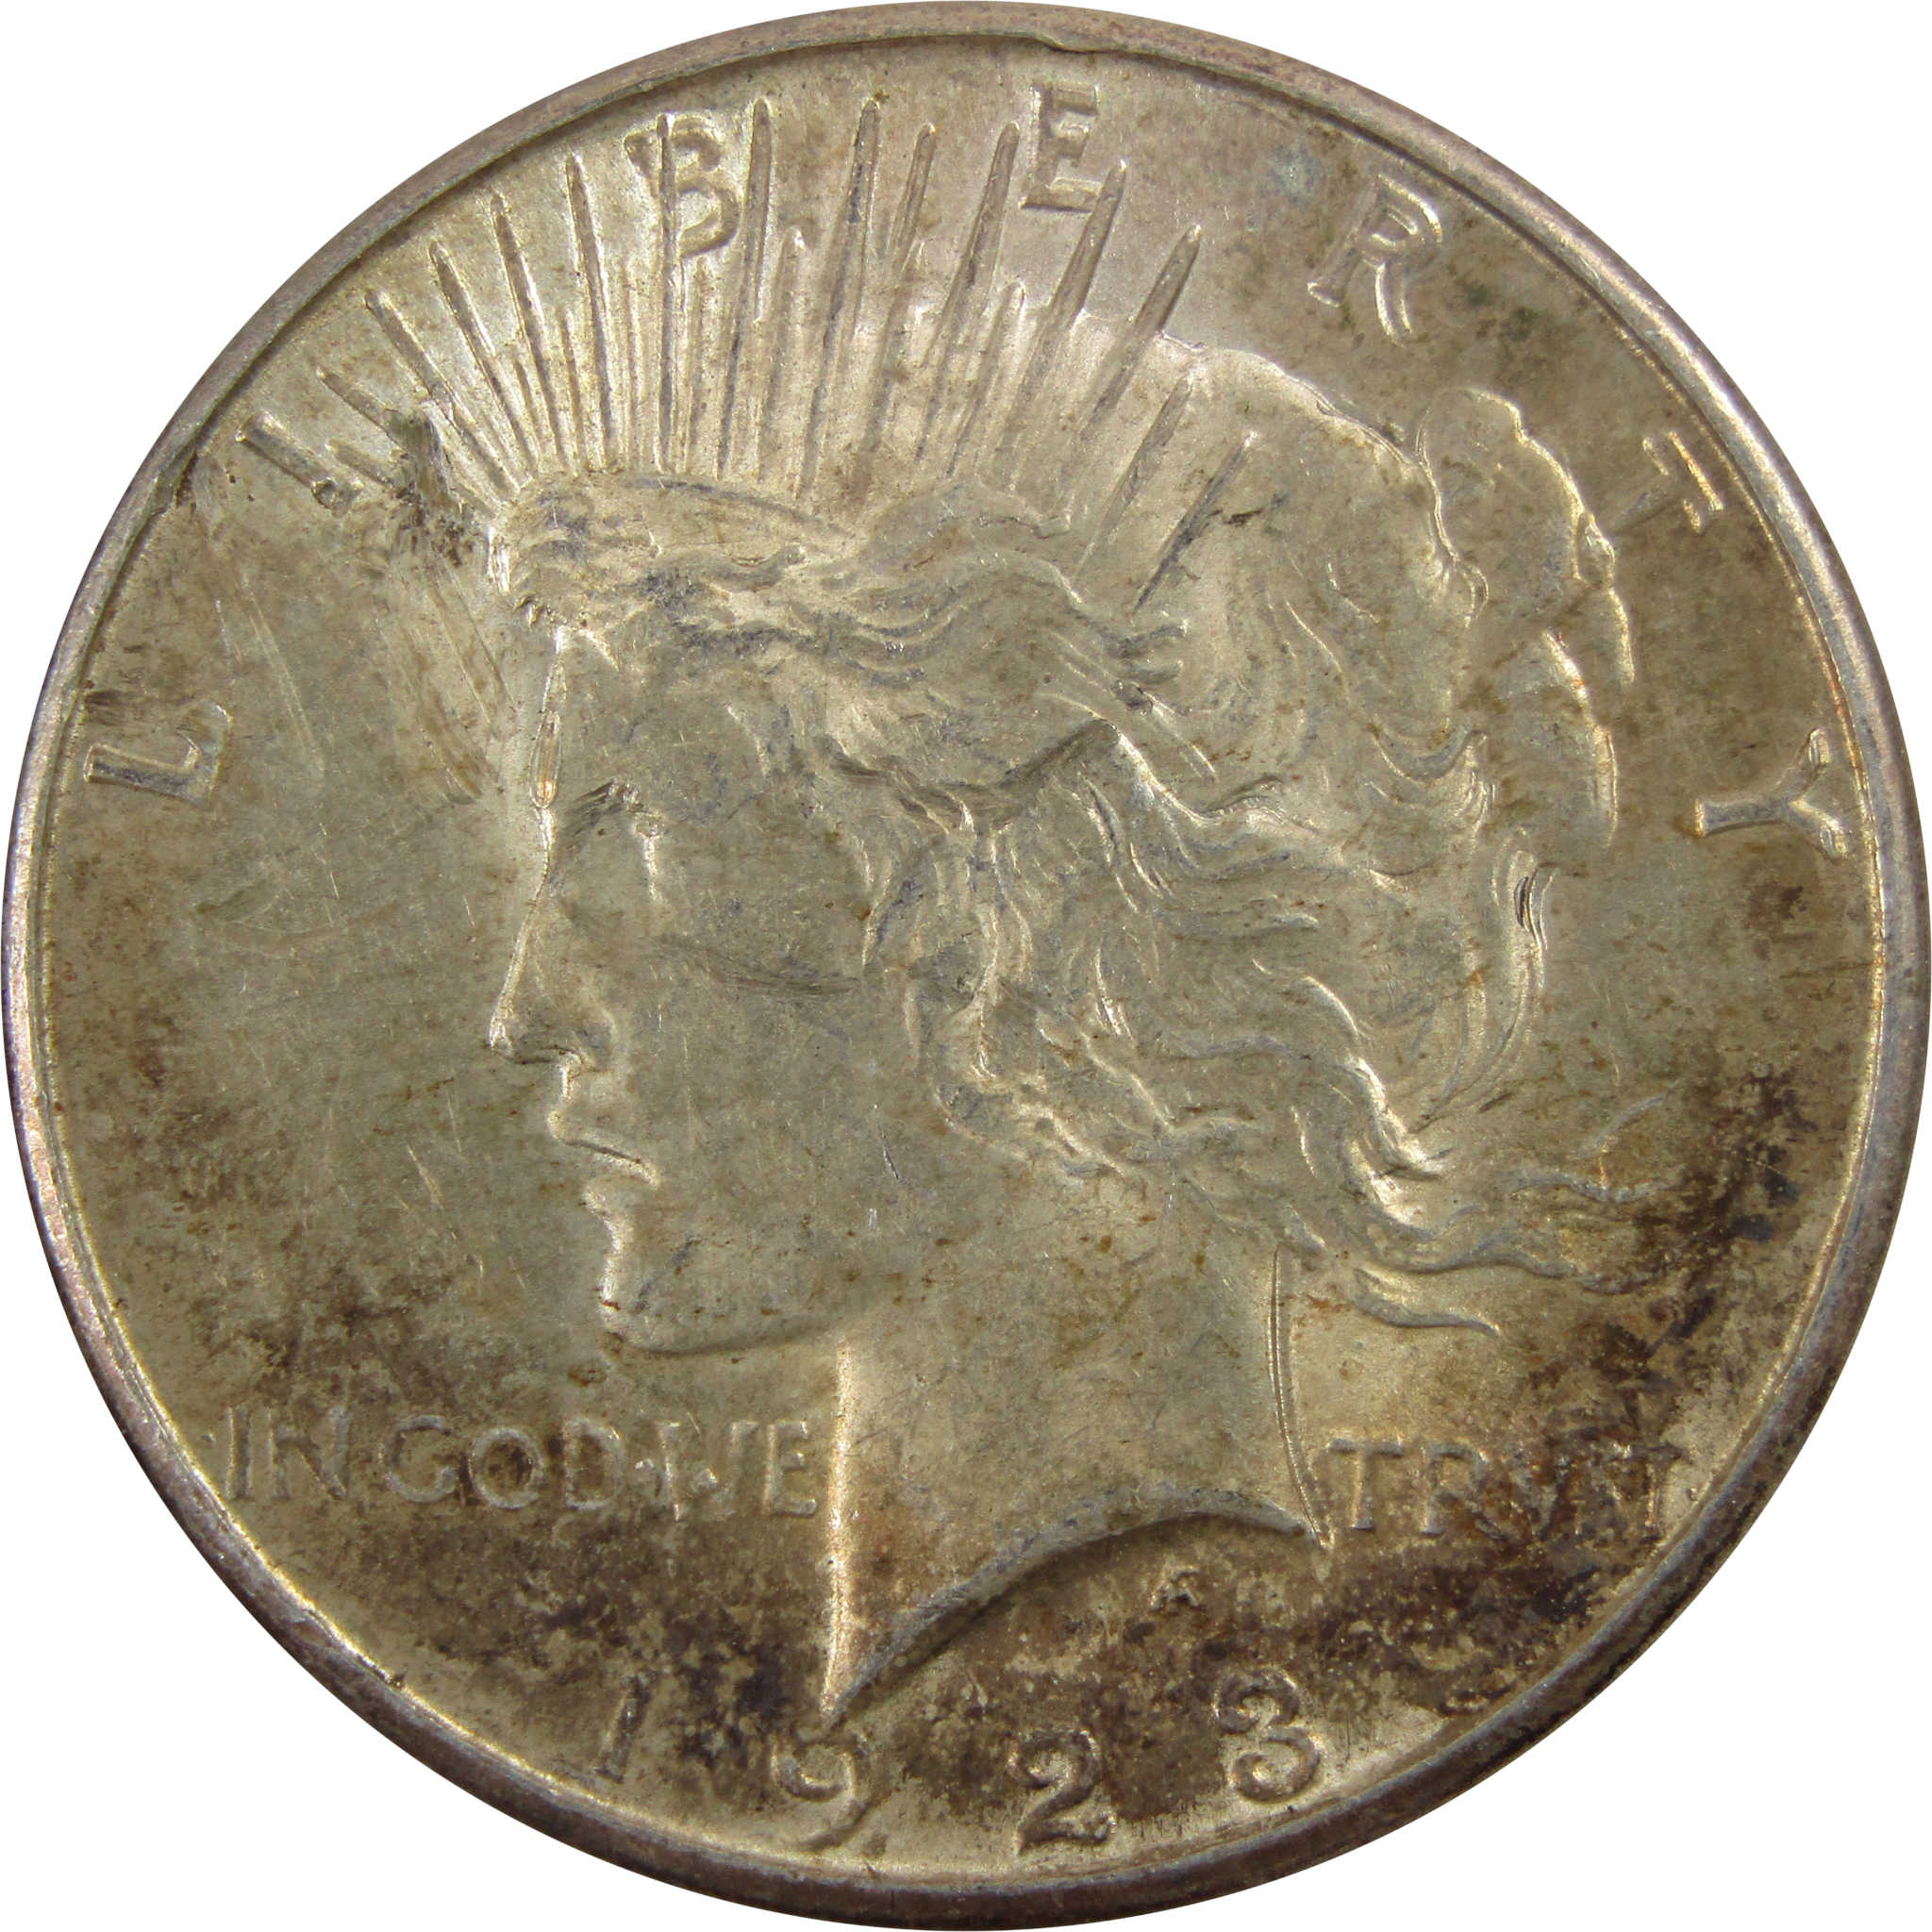 1923 S Peace Dollar XF EF Extremely Fine 90% Silver $1 Coin SKU:I5423